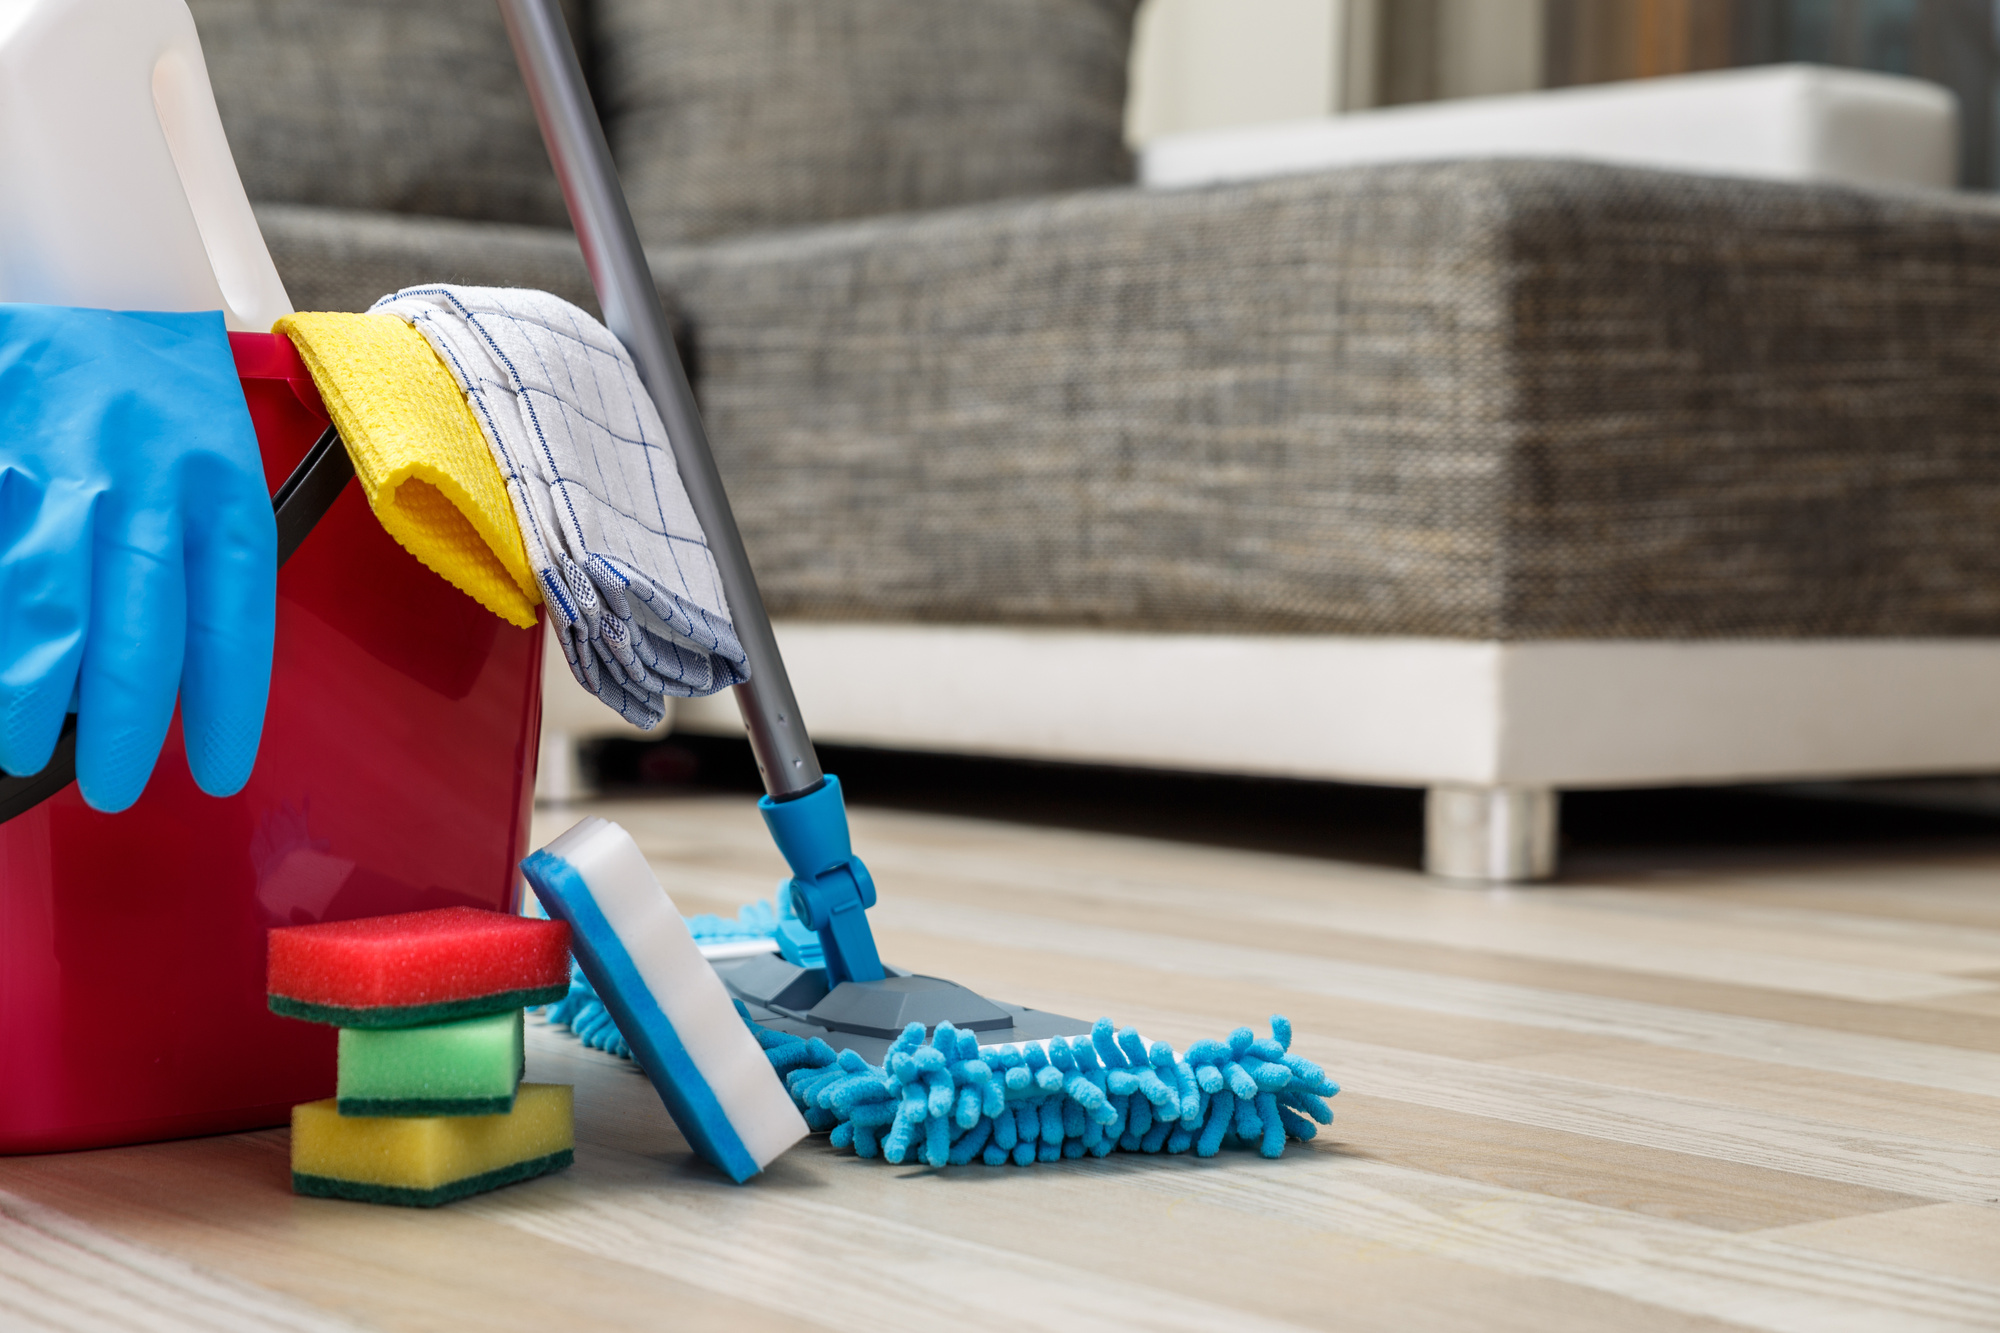 professional house cleaning service